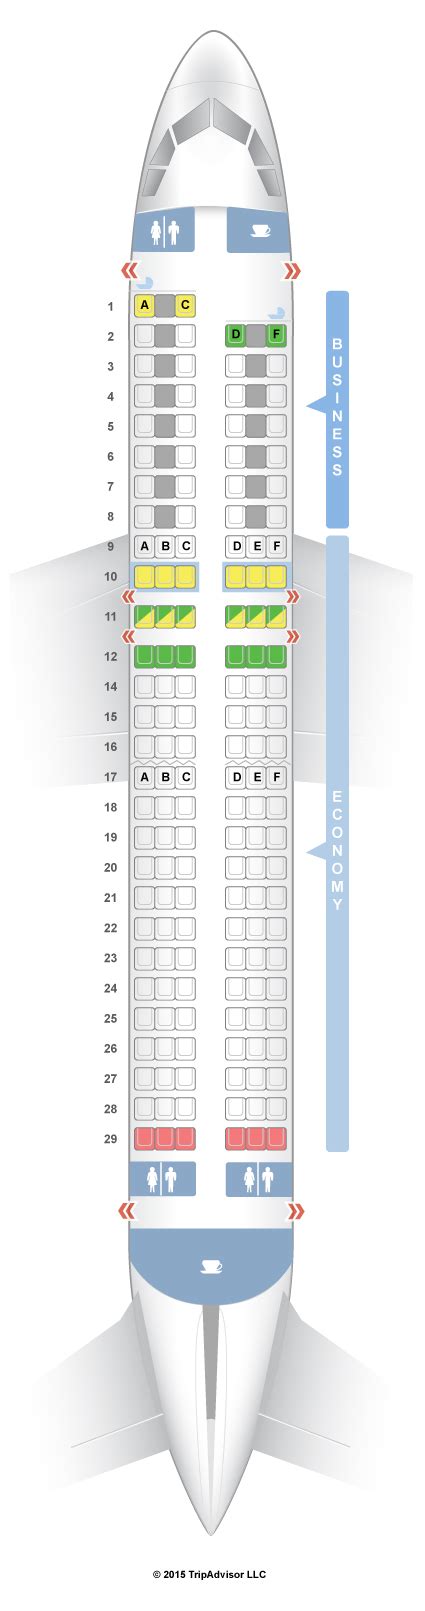 Boeing A380 Seat Map Air France Elcho Table